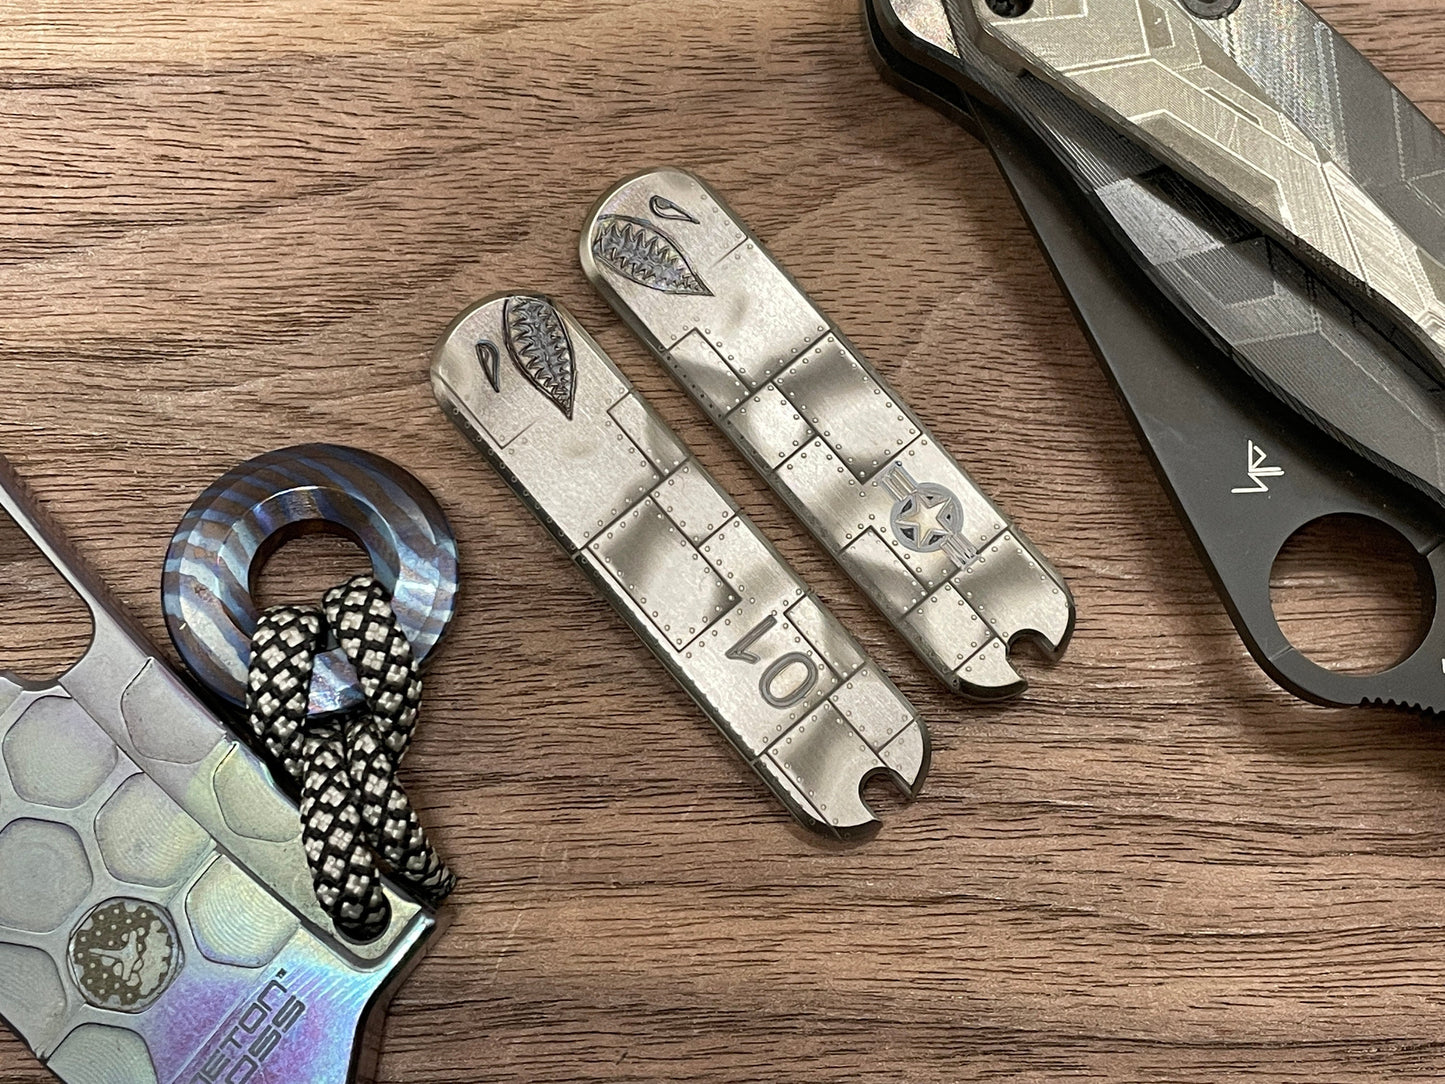 P40 RIVETED engraved 58mm Titanium Scales for Swiss Army SAK